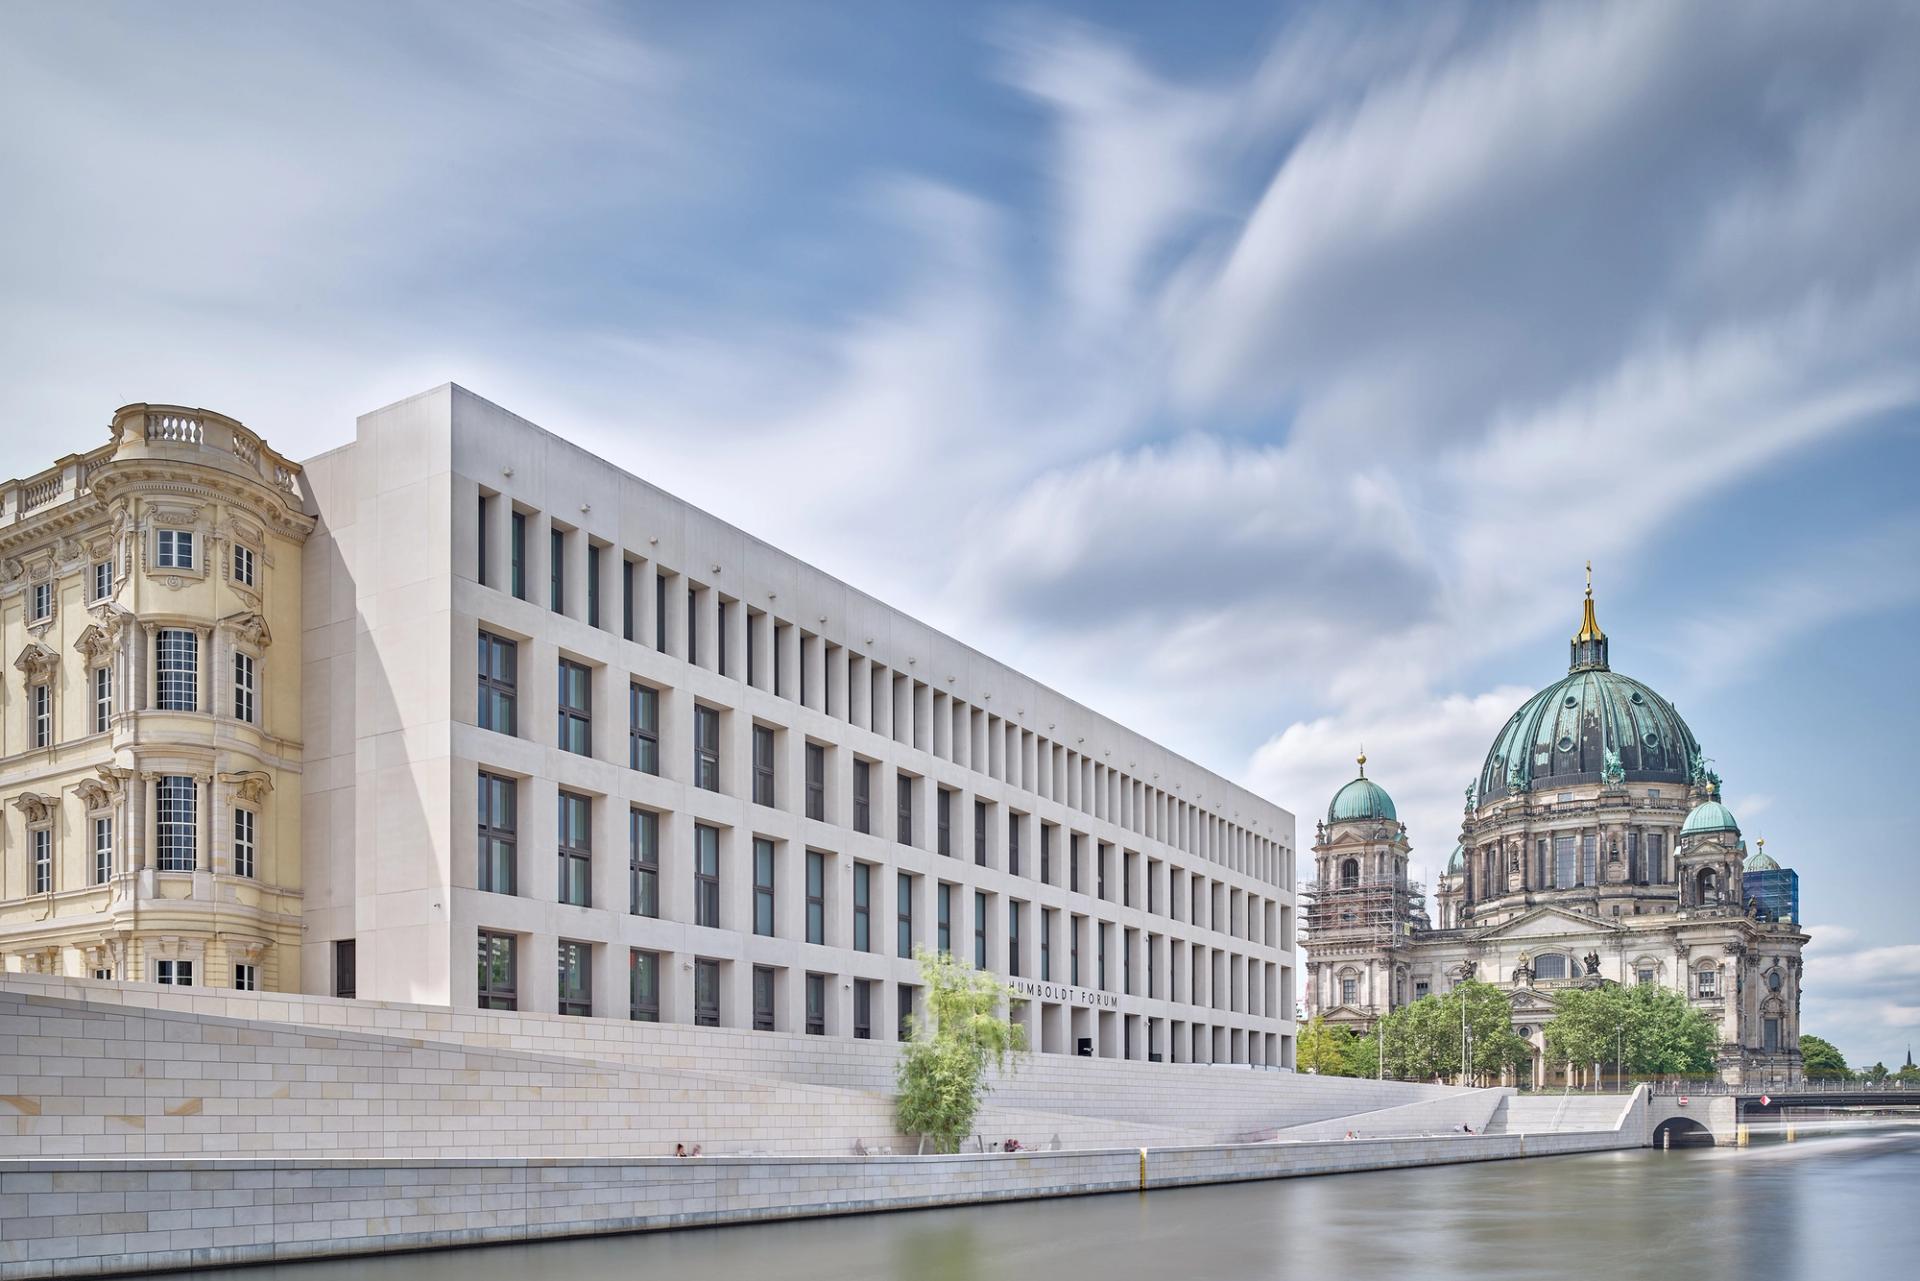 The Humboldt Forum building is finally finished Photo: Alexander Schippel